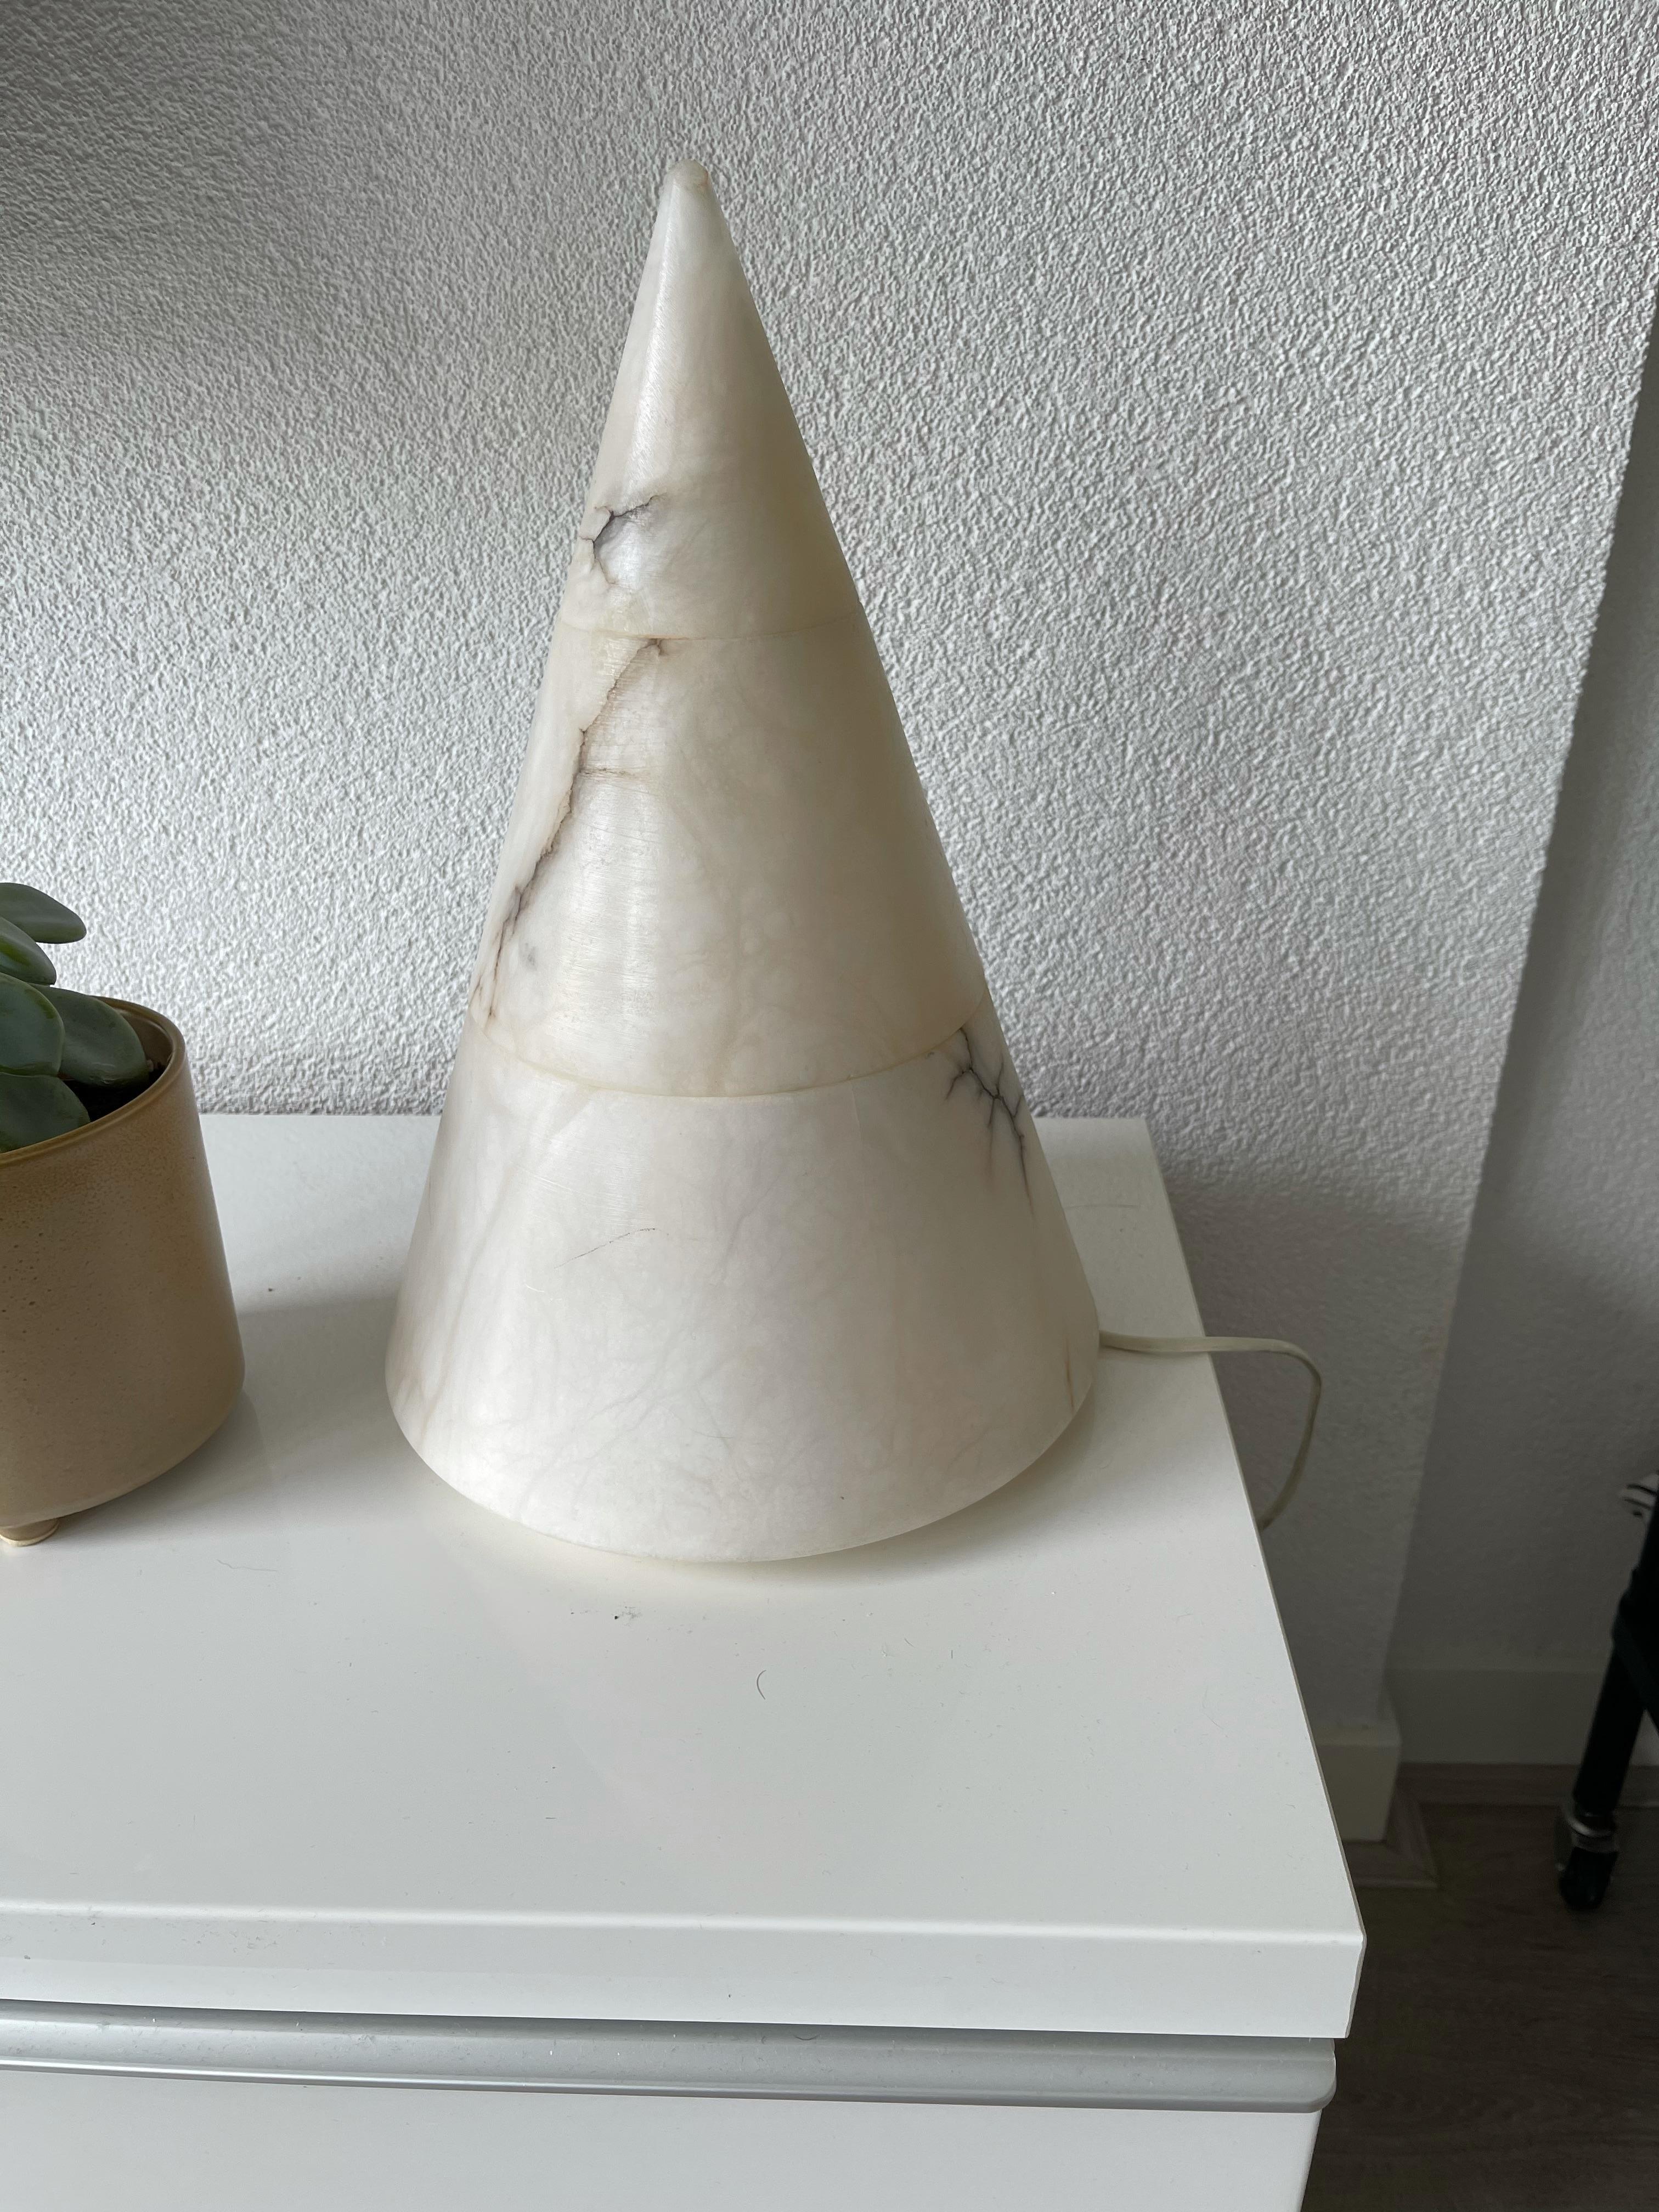 Another Mid-Century Modern Alabaster Pyramid Design and Conical Shape Table Lamp For Sale 9